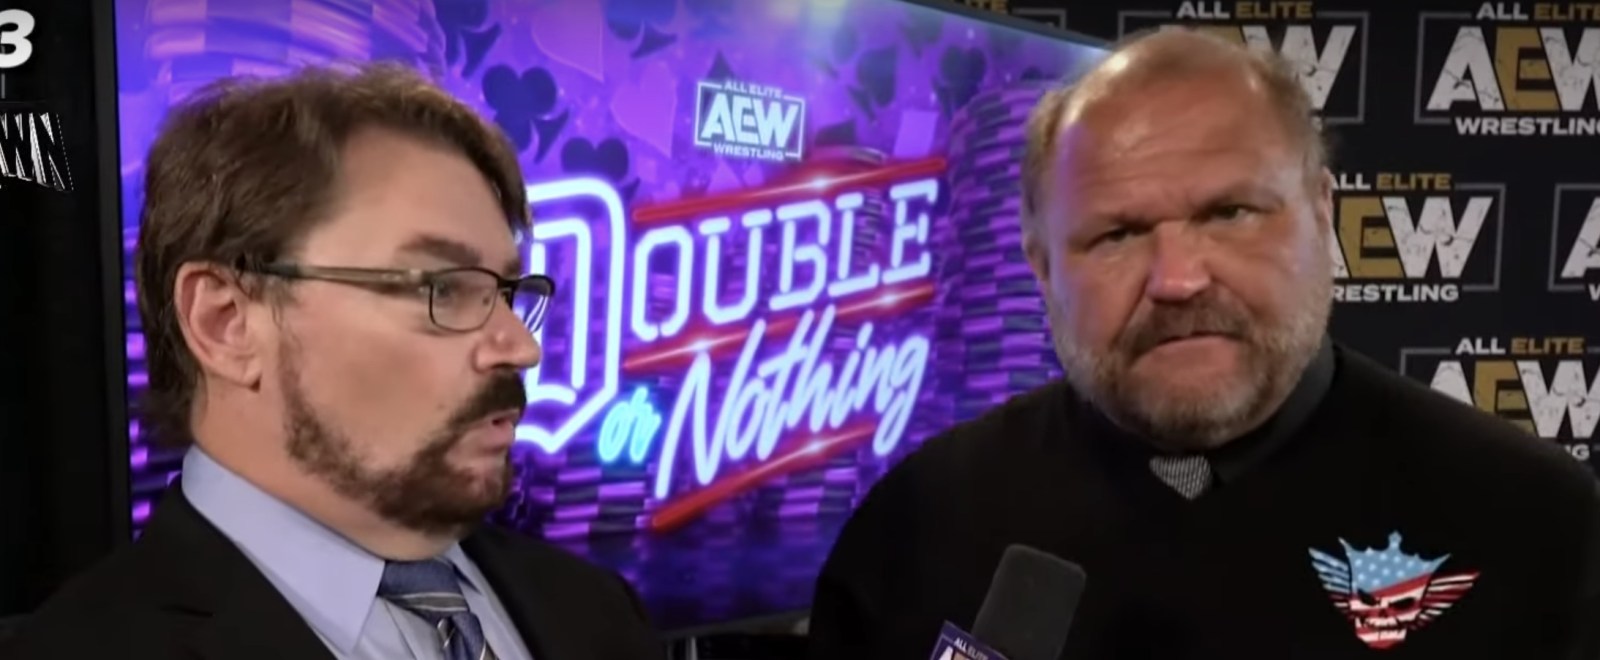 AEW Double Or Nothing banner